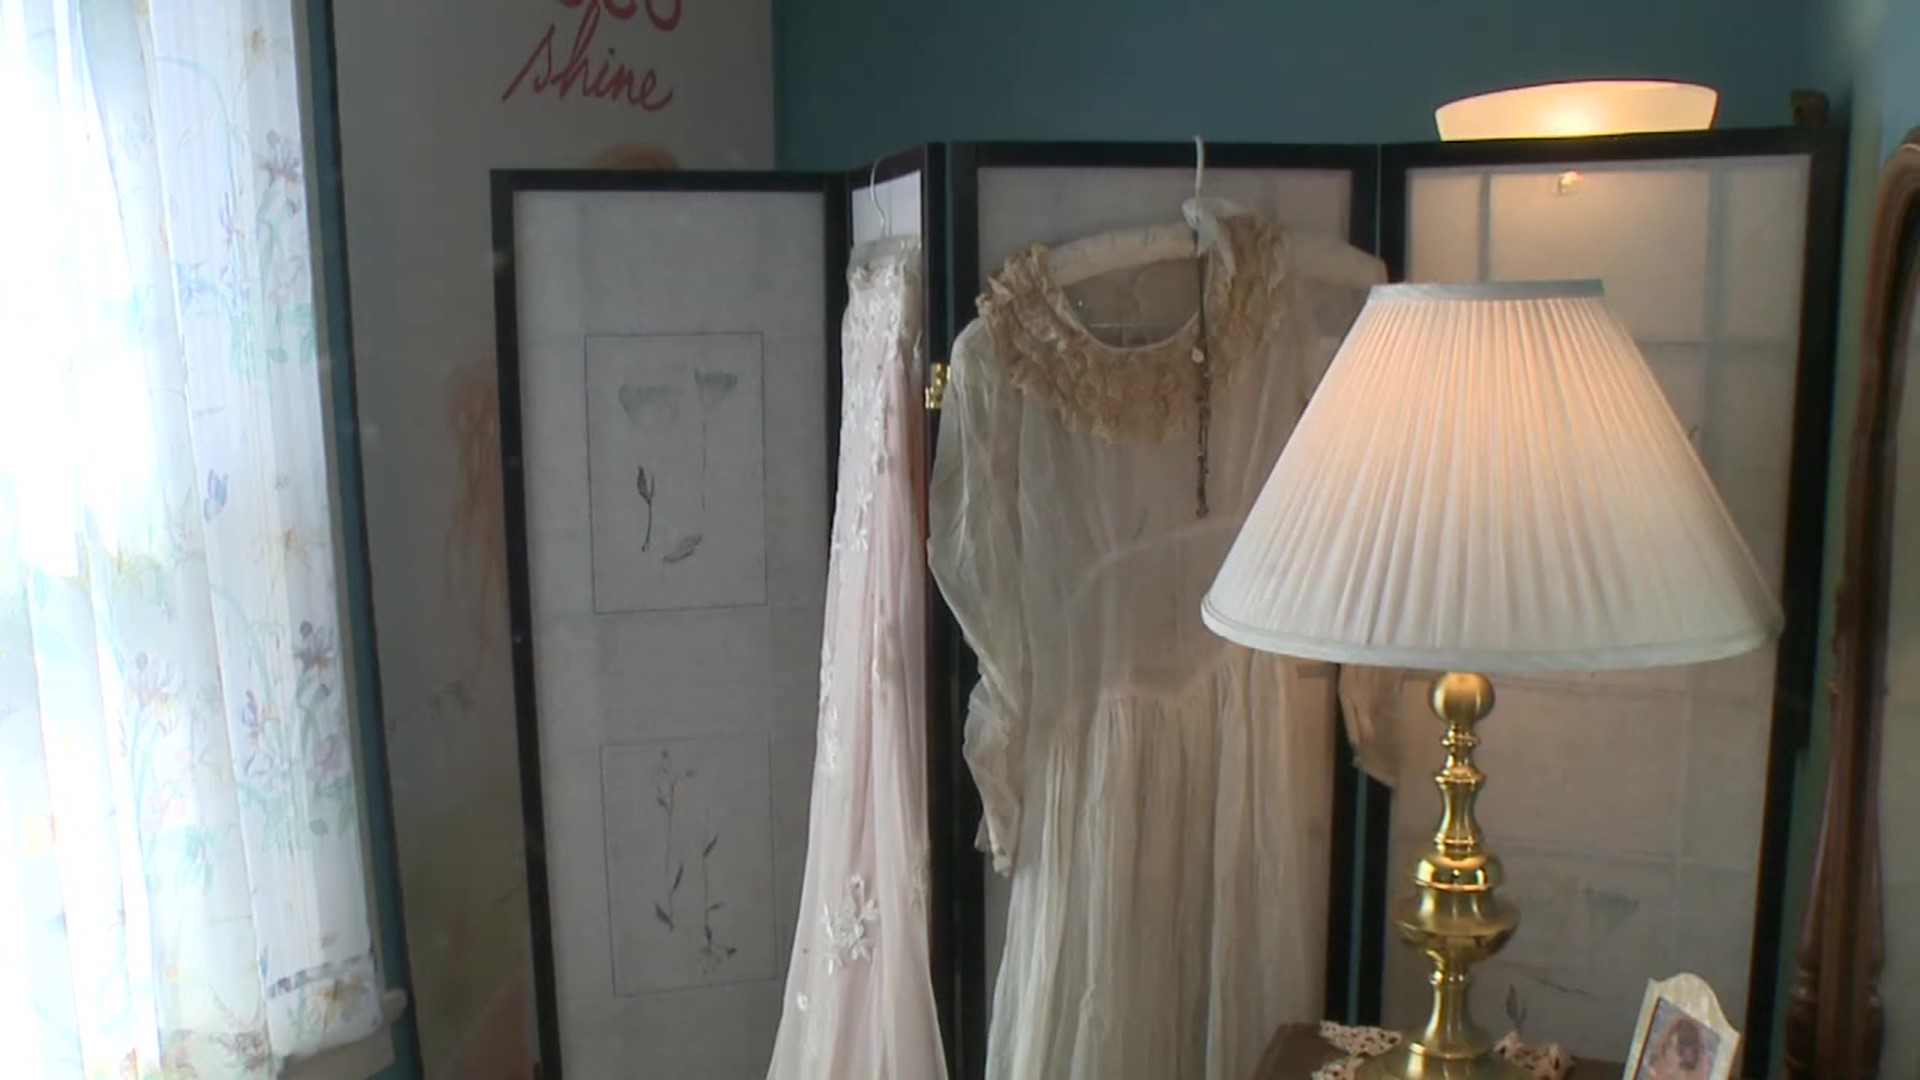 Earlier this month, a consignment shop owner in Luzerne County says a family heirloom was sold by mistake and she put out a plea on social media to get it back.